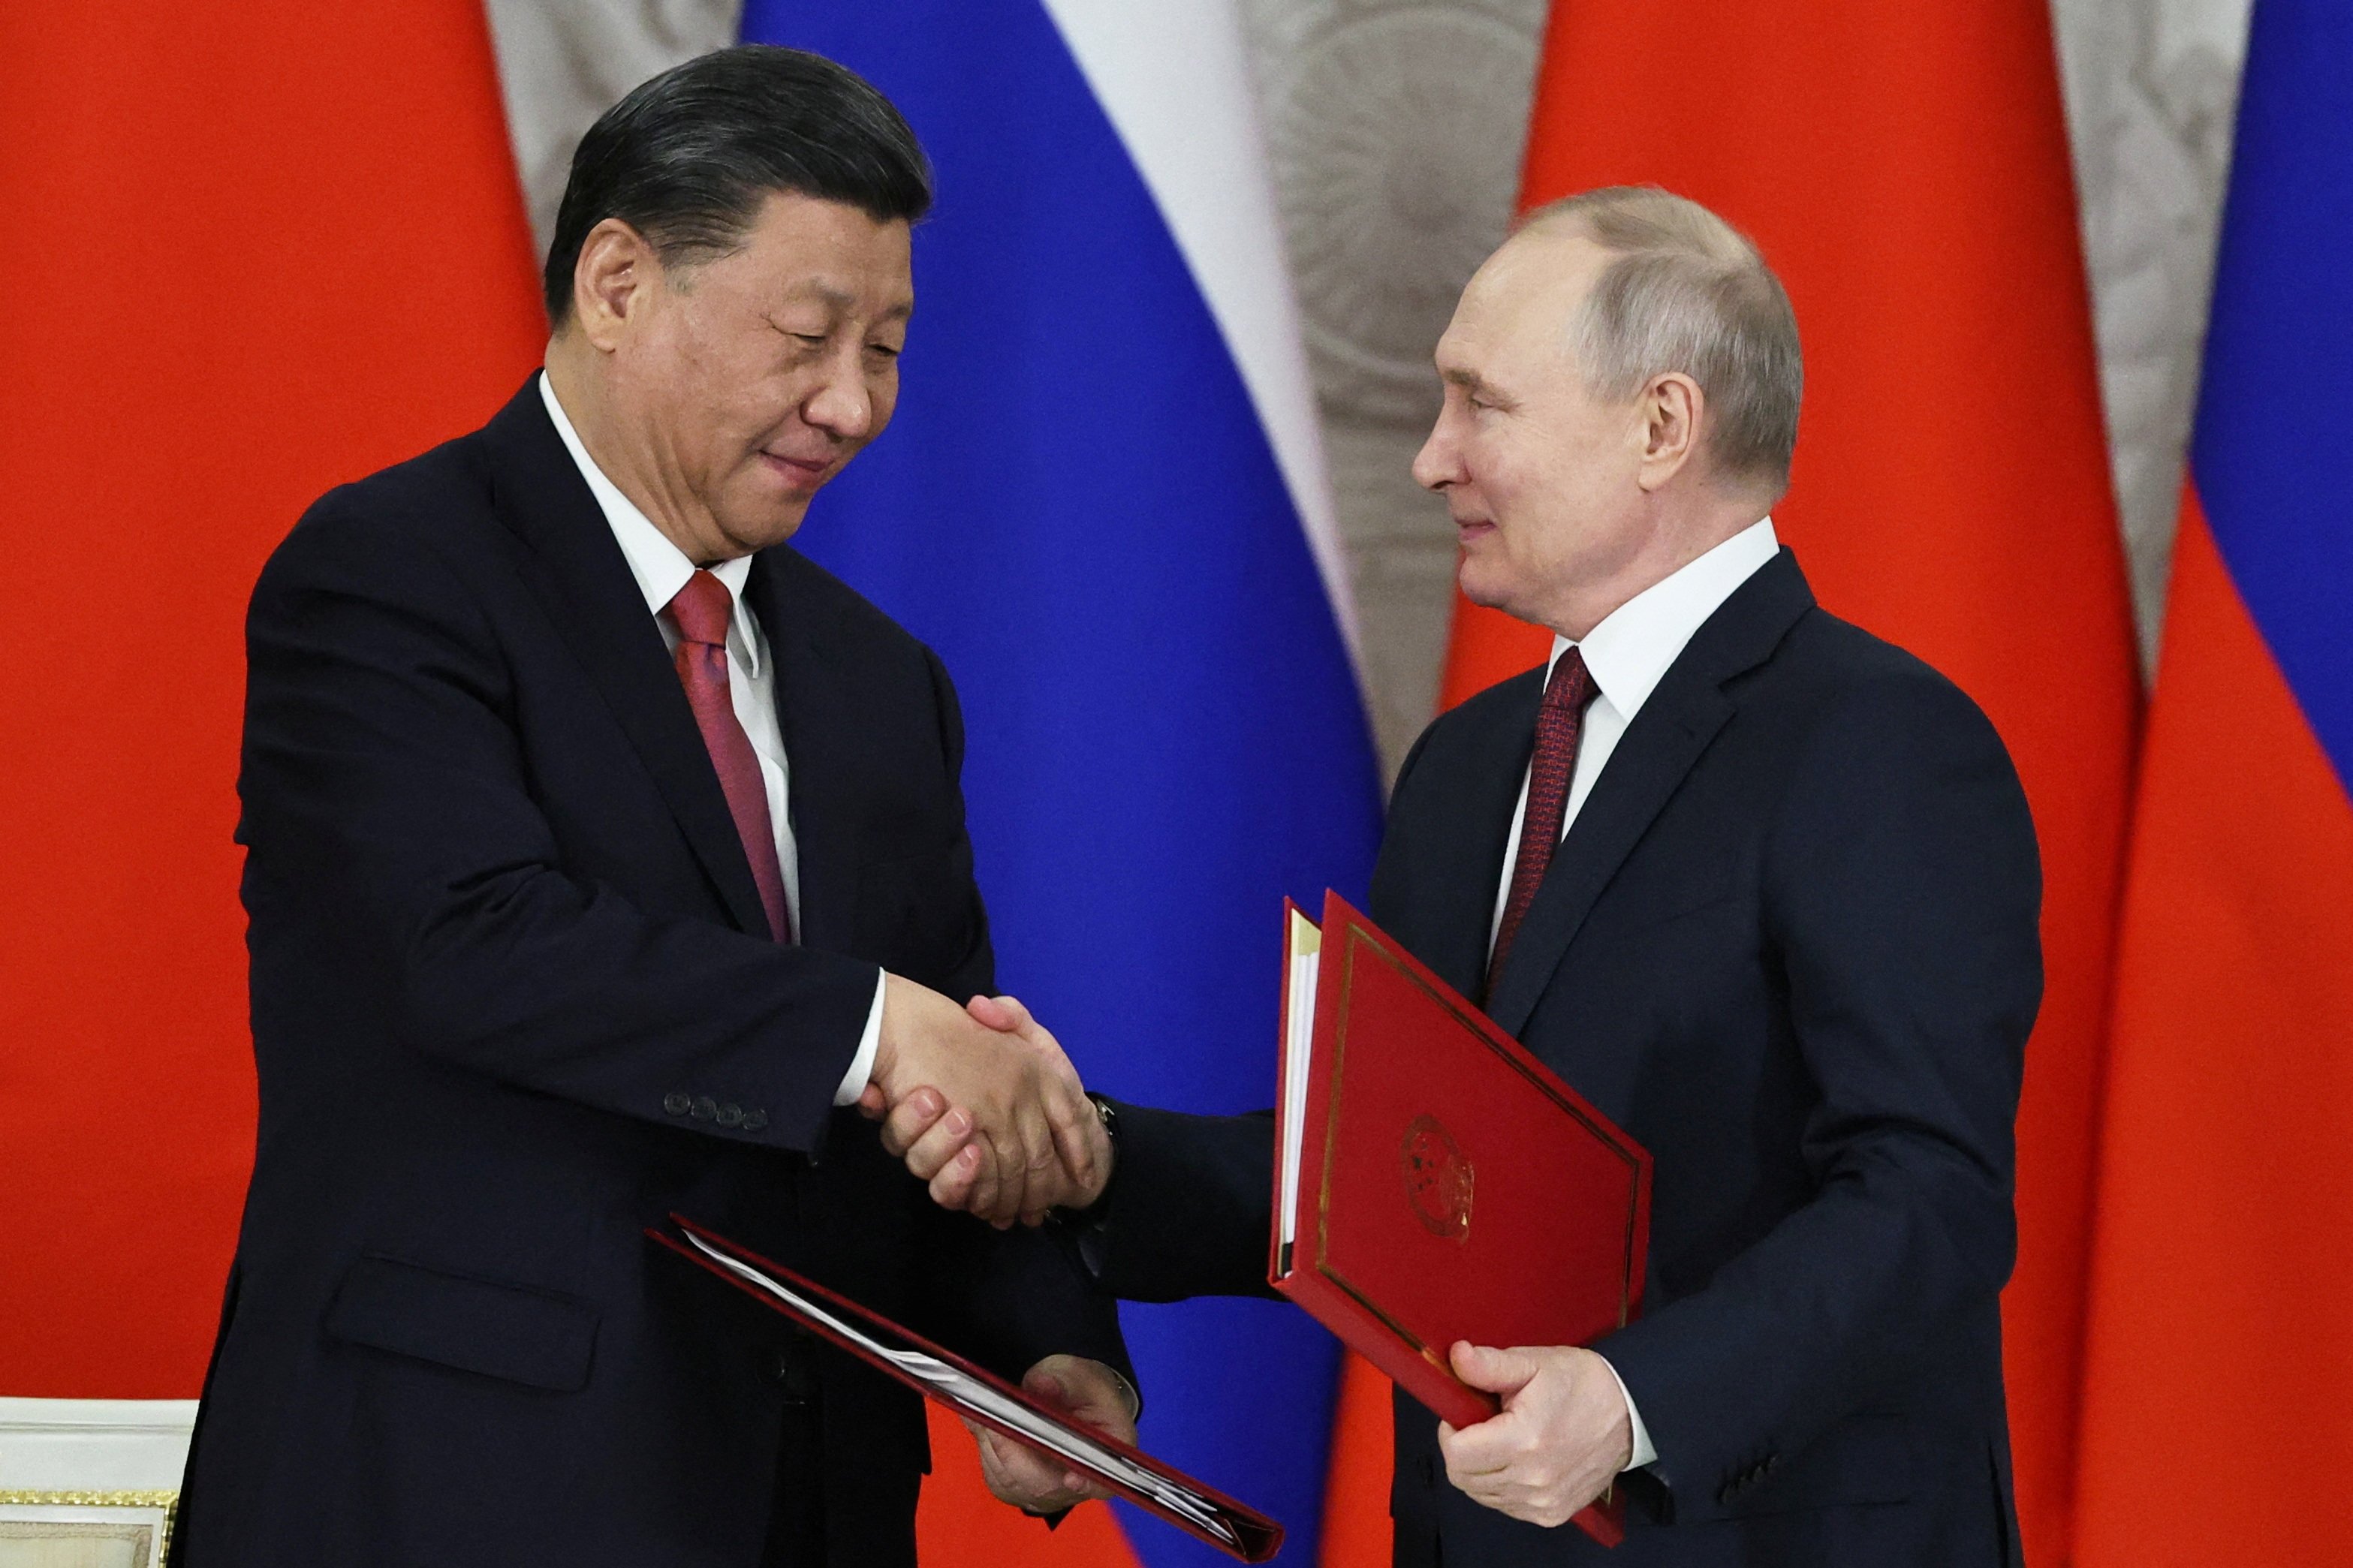 Xi Jinping and Vladimir Putin have built a strong rapport since the Chinese leader came to power more than a decade ago. Photo: Pool via Reuters